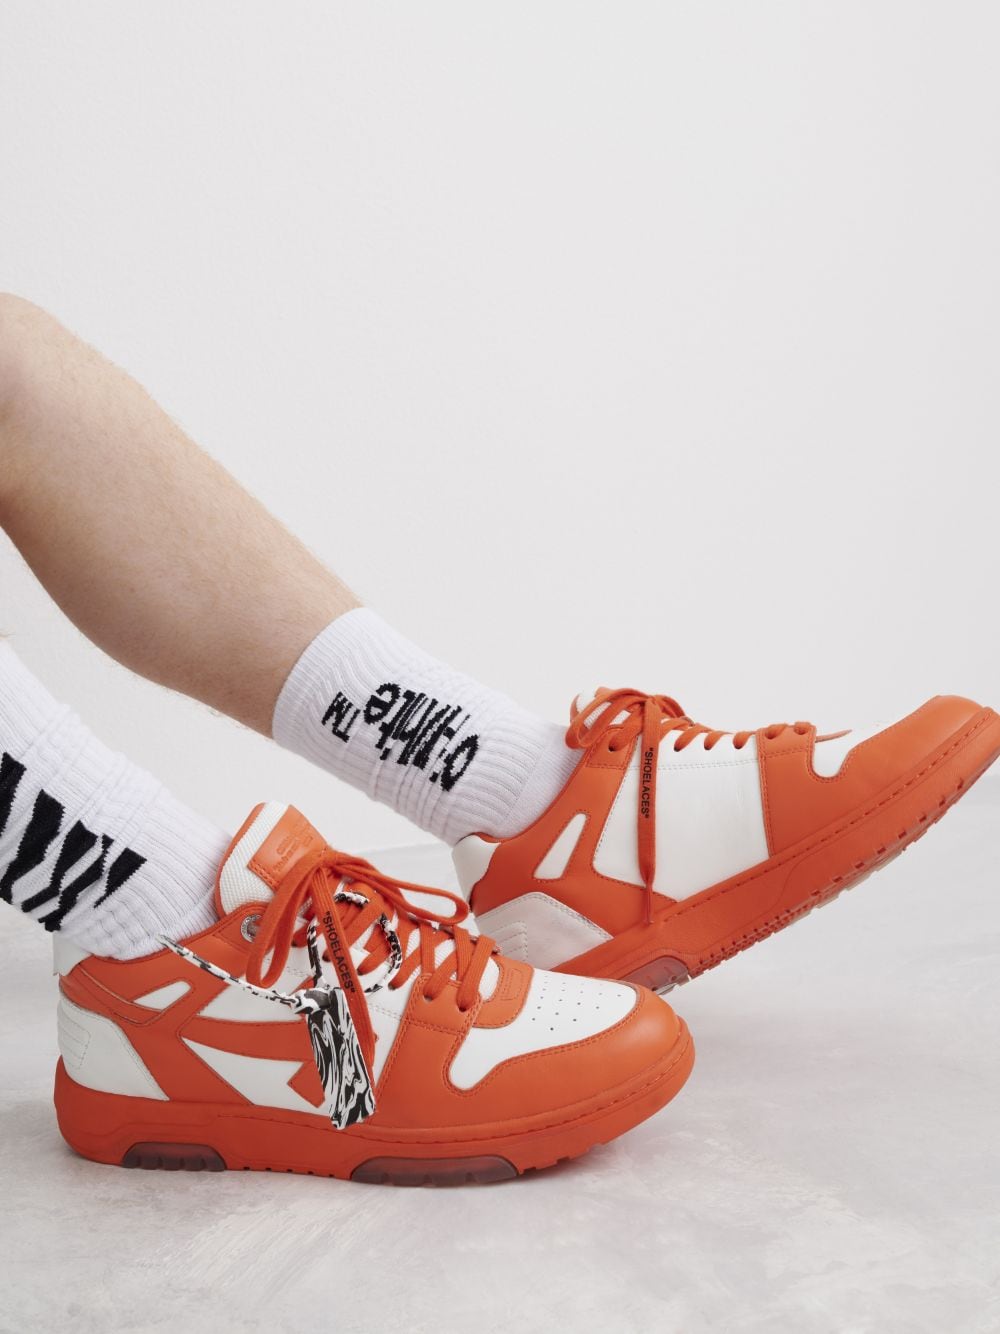 OUT OF OFFICE "OOO" SNEAKERS